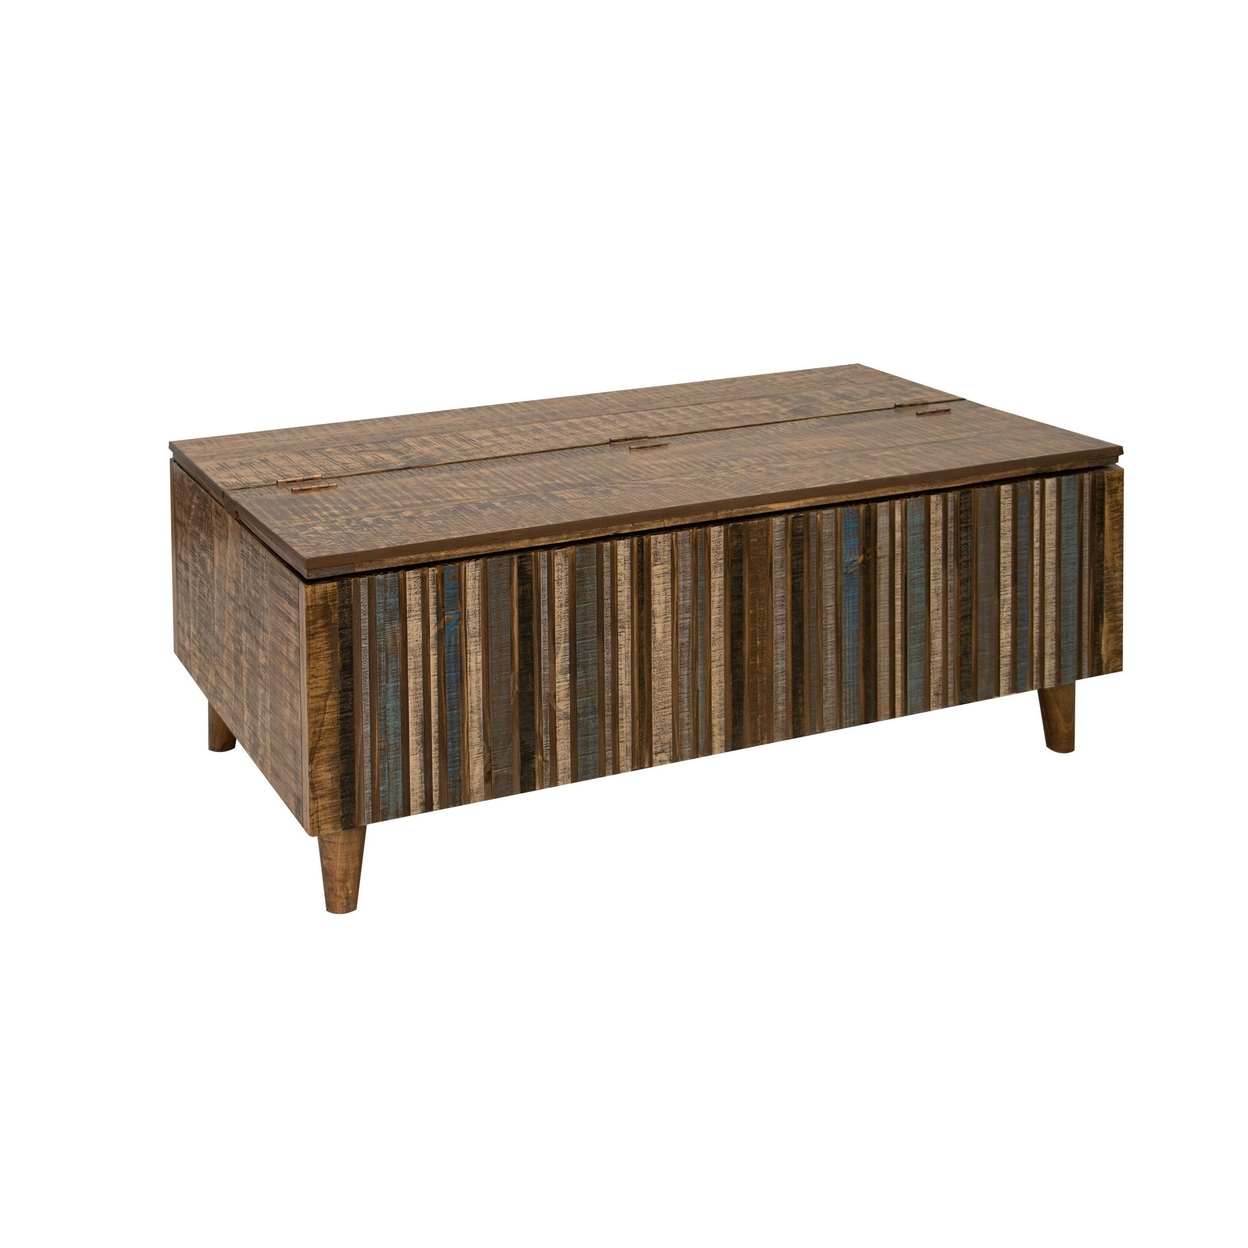 Texu 50 Inch Cocktail Table, Brown Blue Pine Wood, Hinged Top, Tapered Legs - Saltoro Sherpi